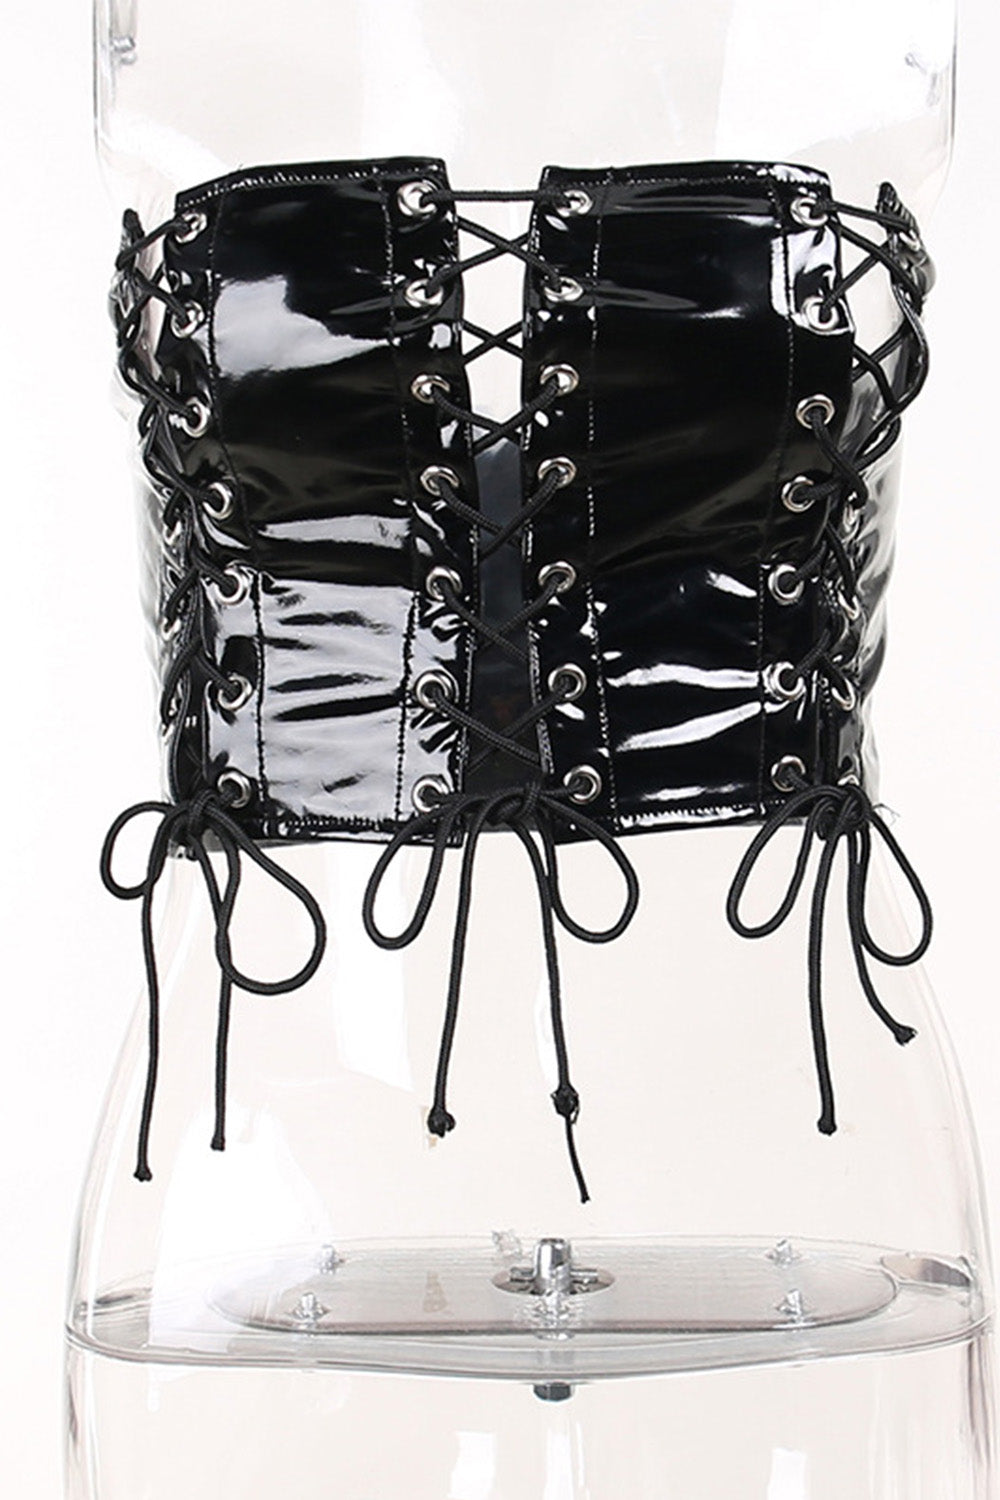 Gothic Black Party See-through Mesh Hollow Out Smock Lace Up Patent Tube Top Two Pieces Blouses Set